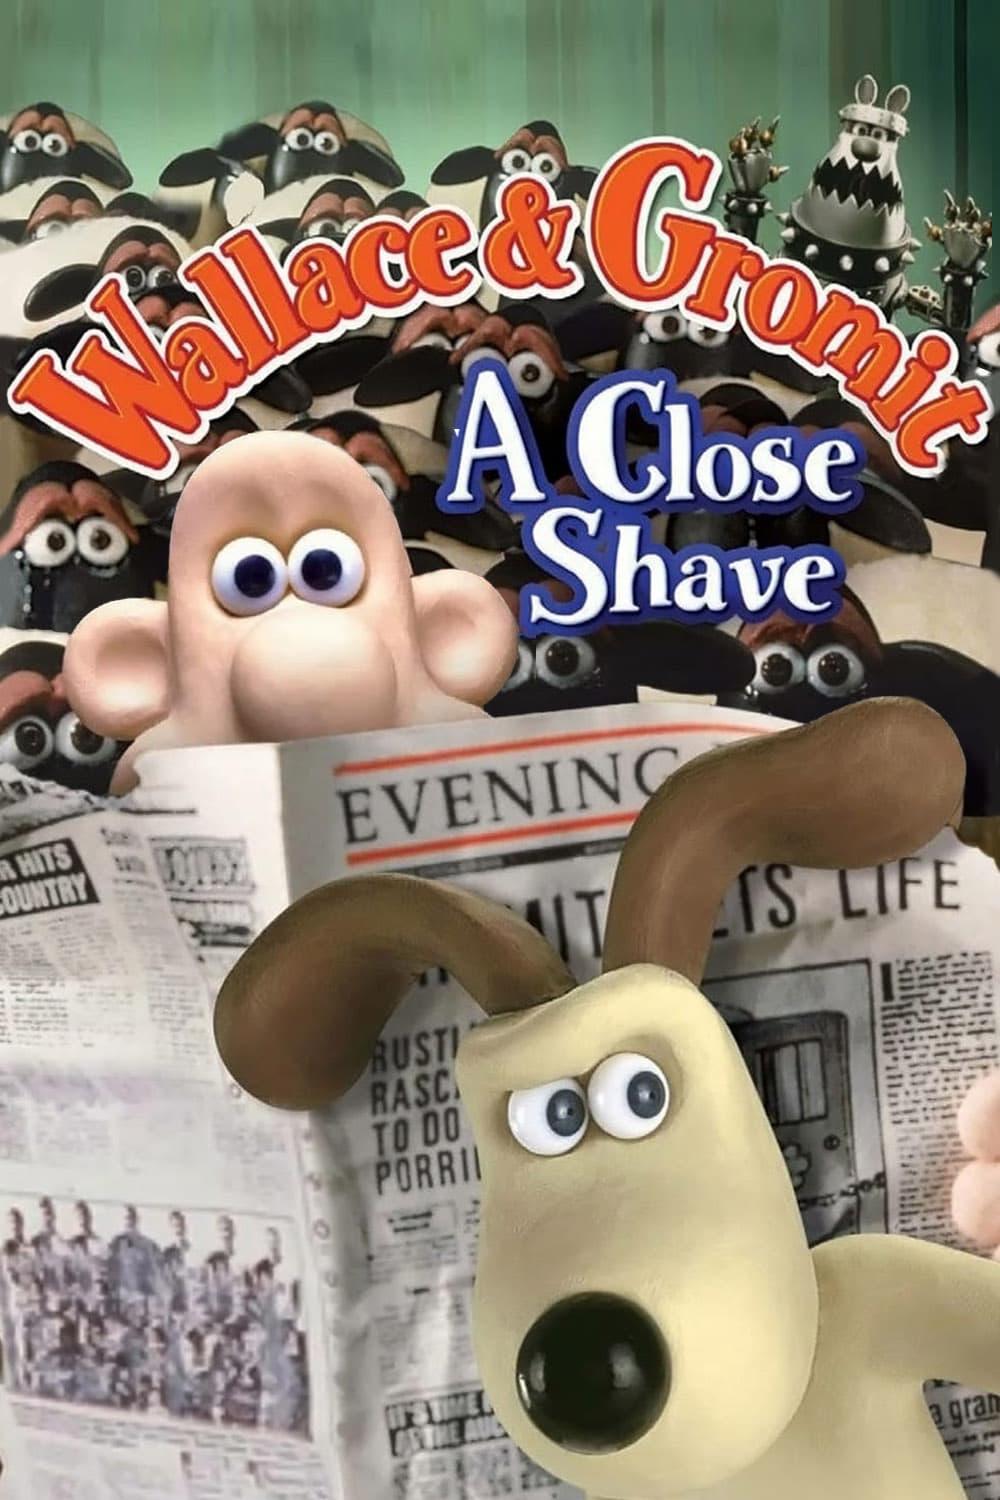 A Close Shave poster